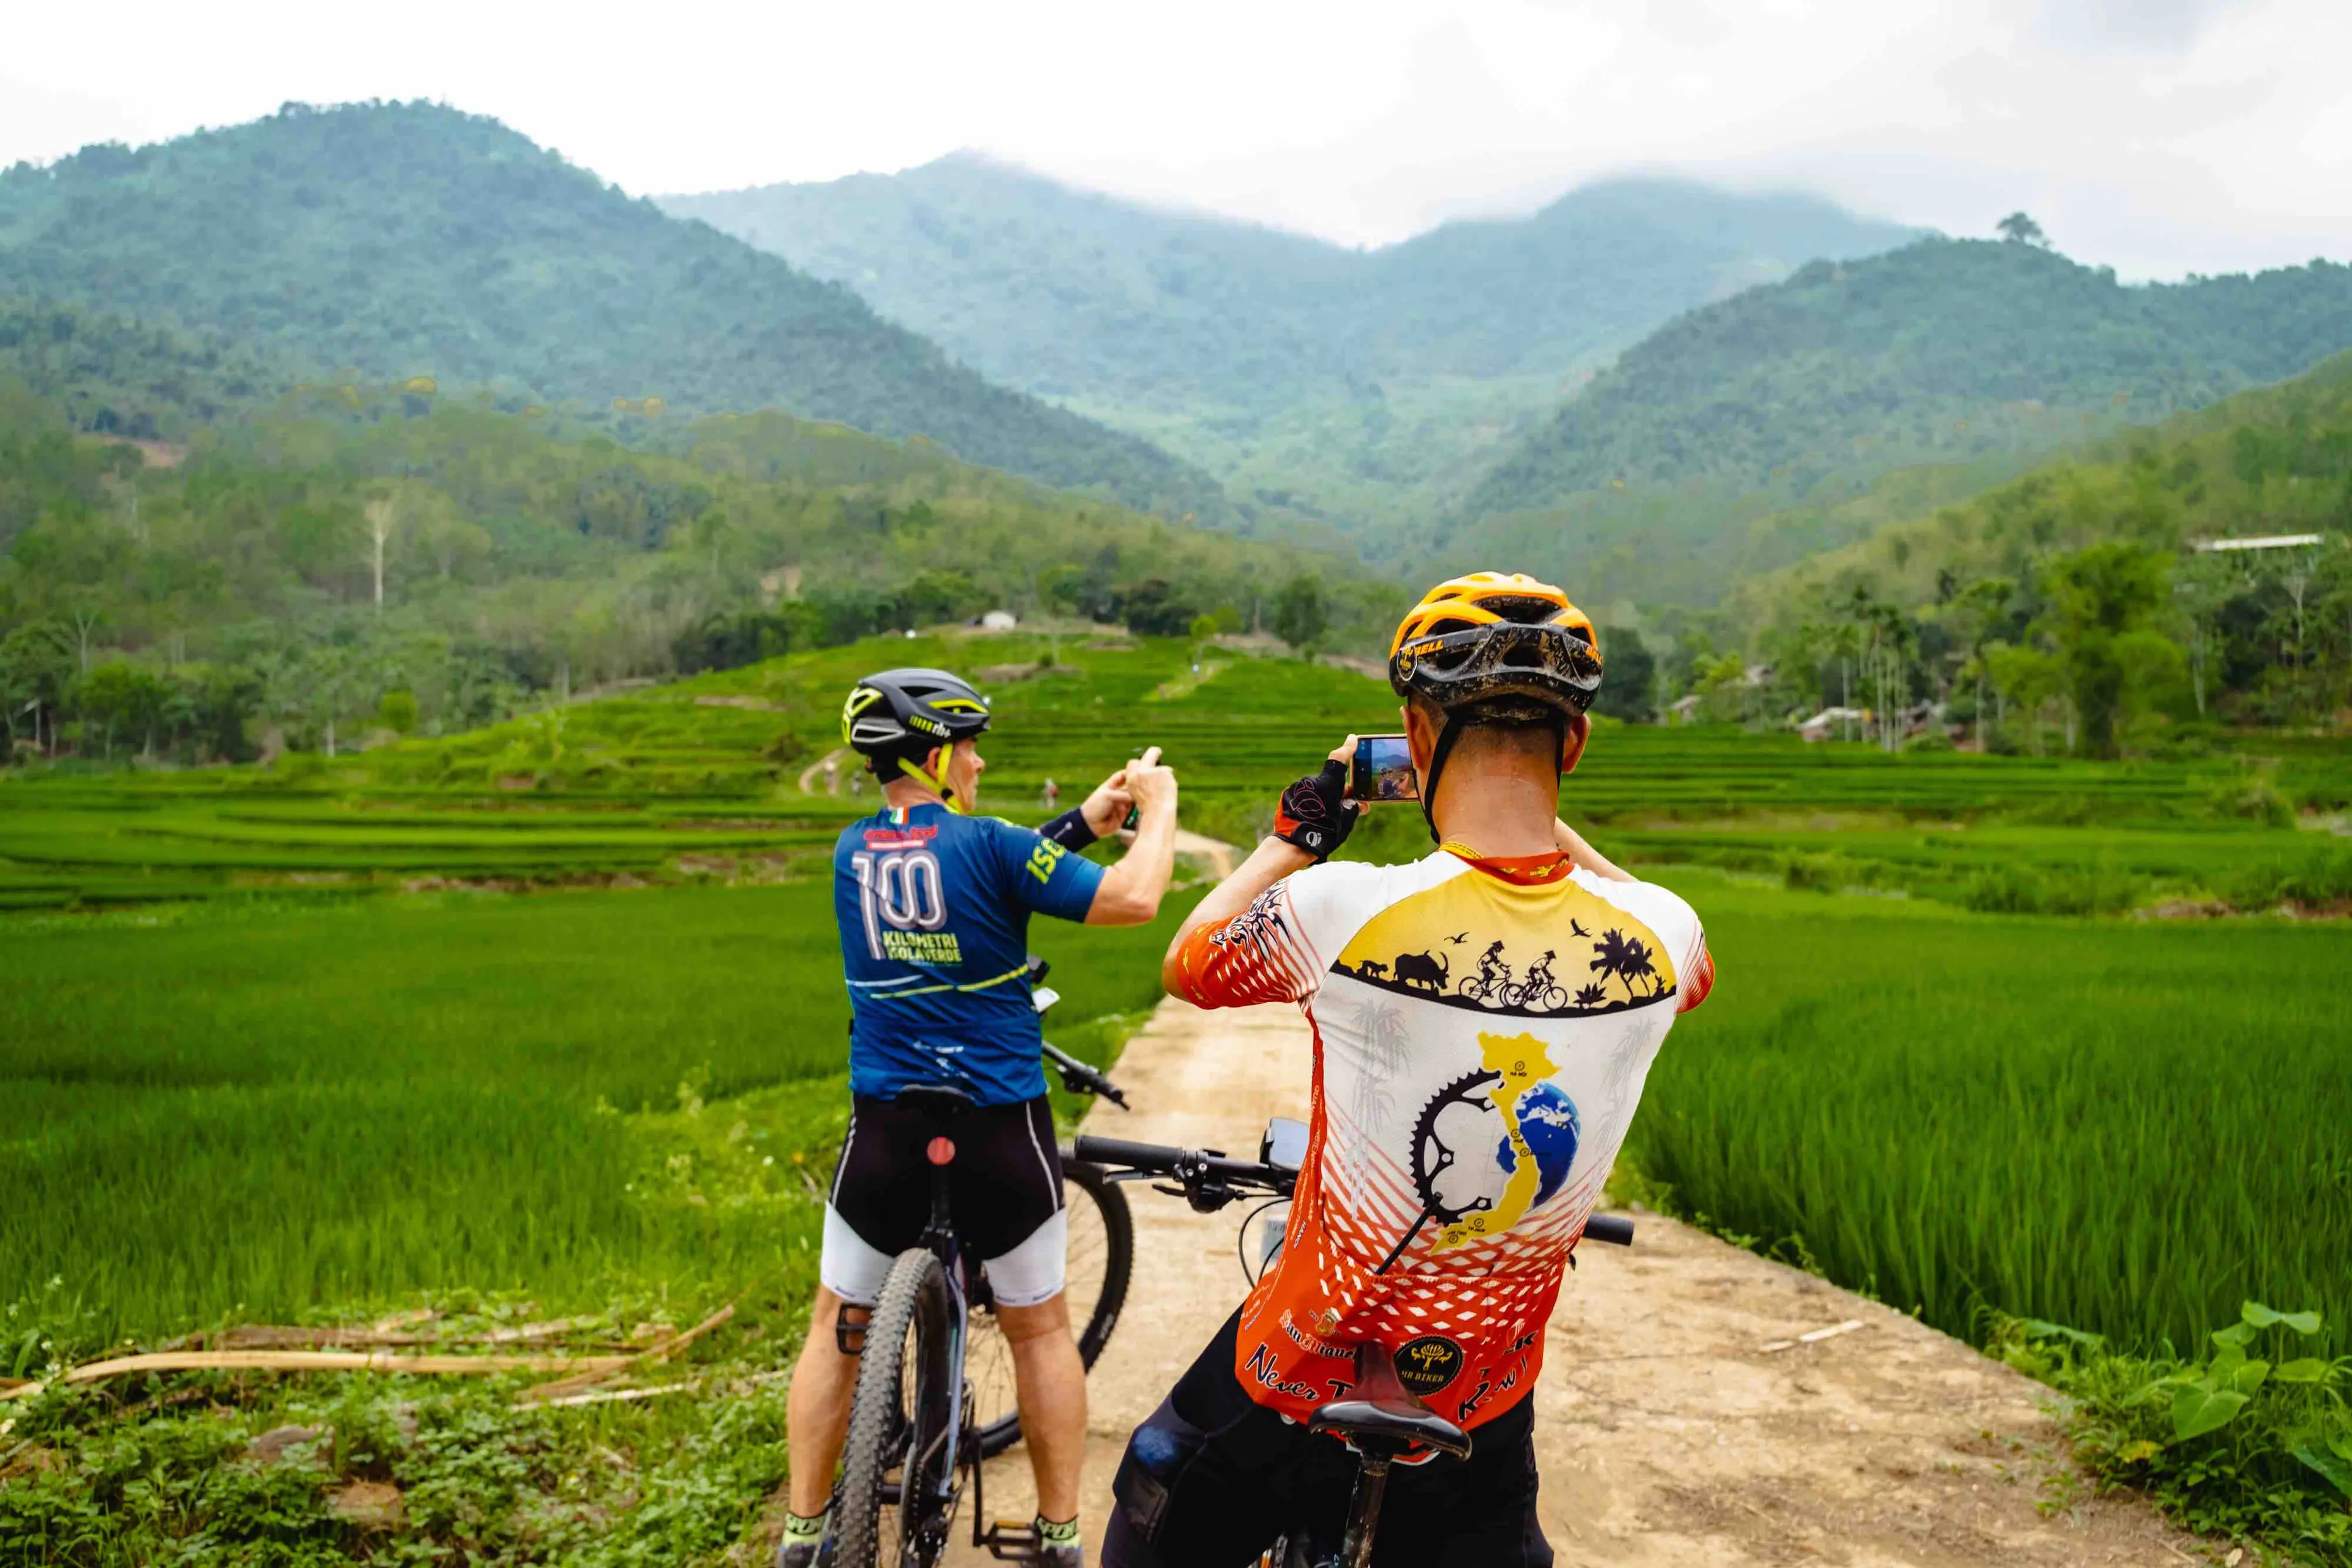 Suitable Cycling Clothes play a huge role in every trip - Mr Biker Saigon jersey